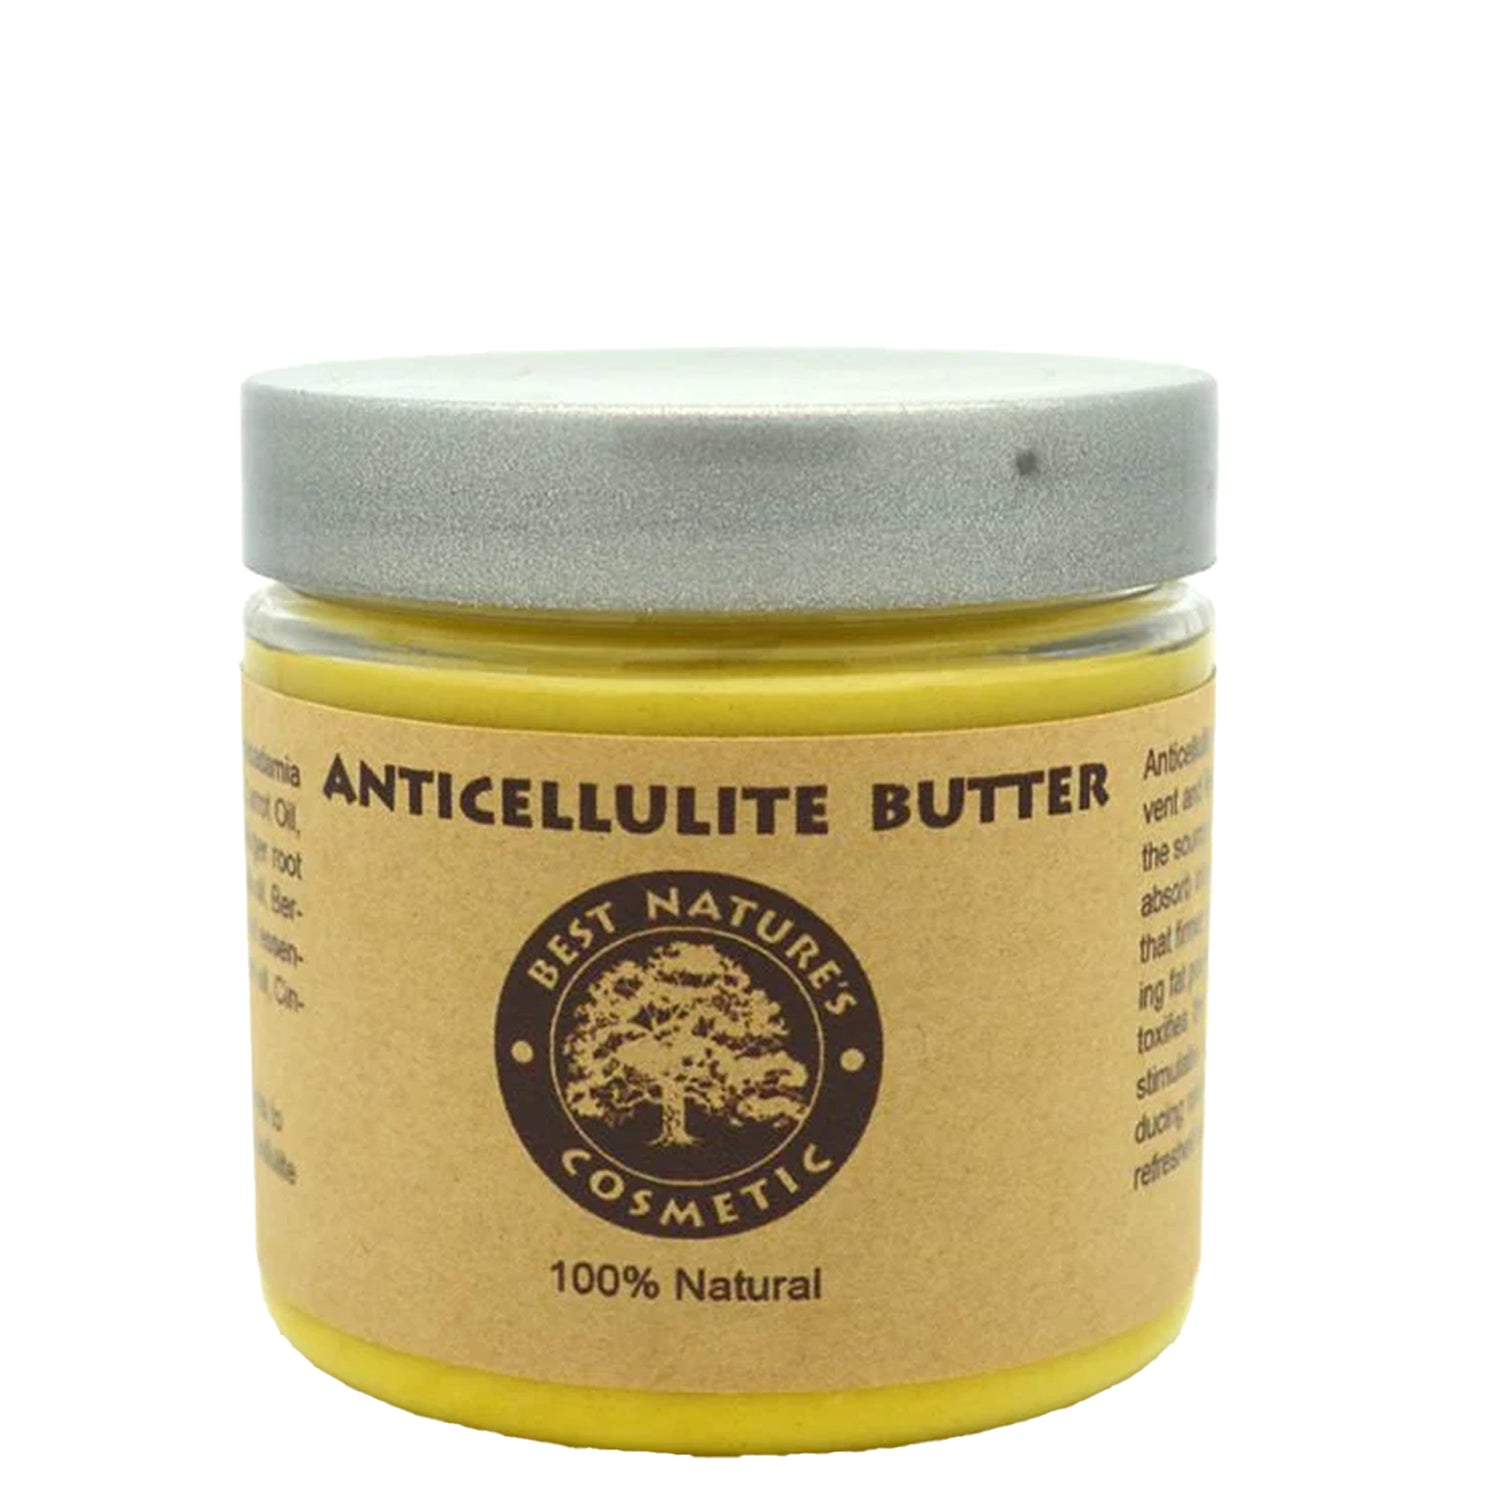 Anticellulite butter 5oz / 150ml